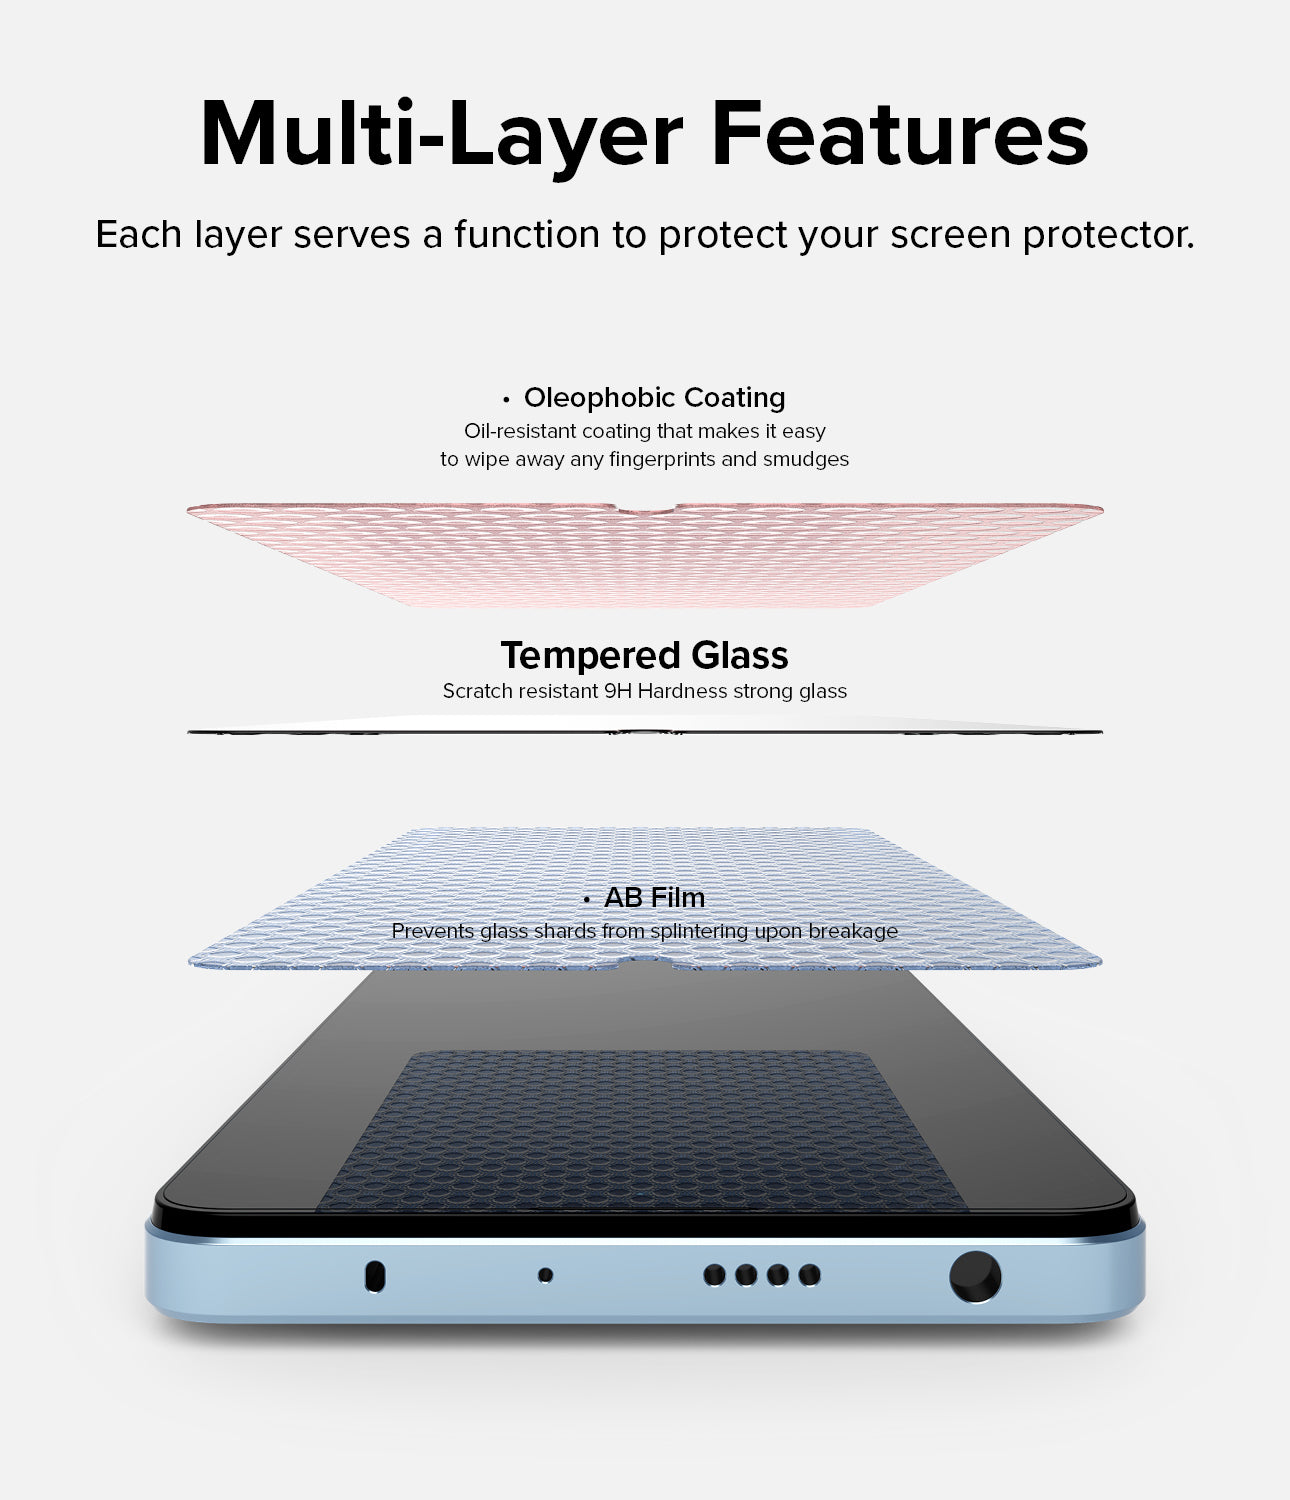 Each layer serves a function to protect your screen protector